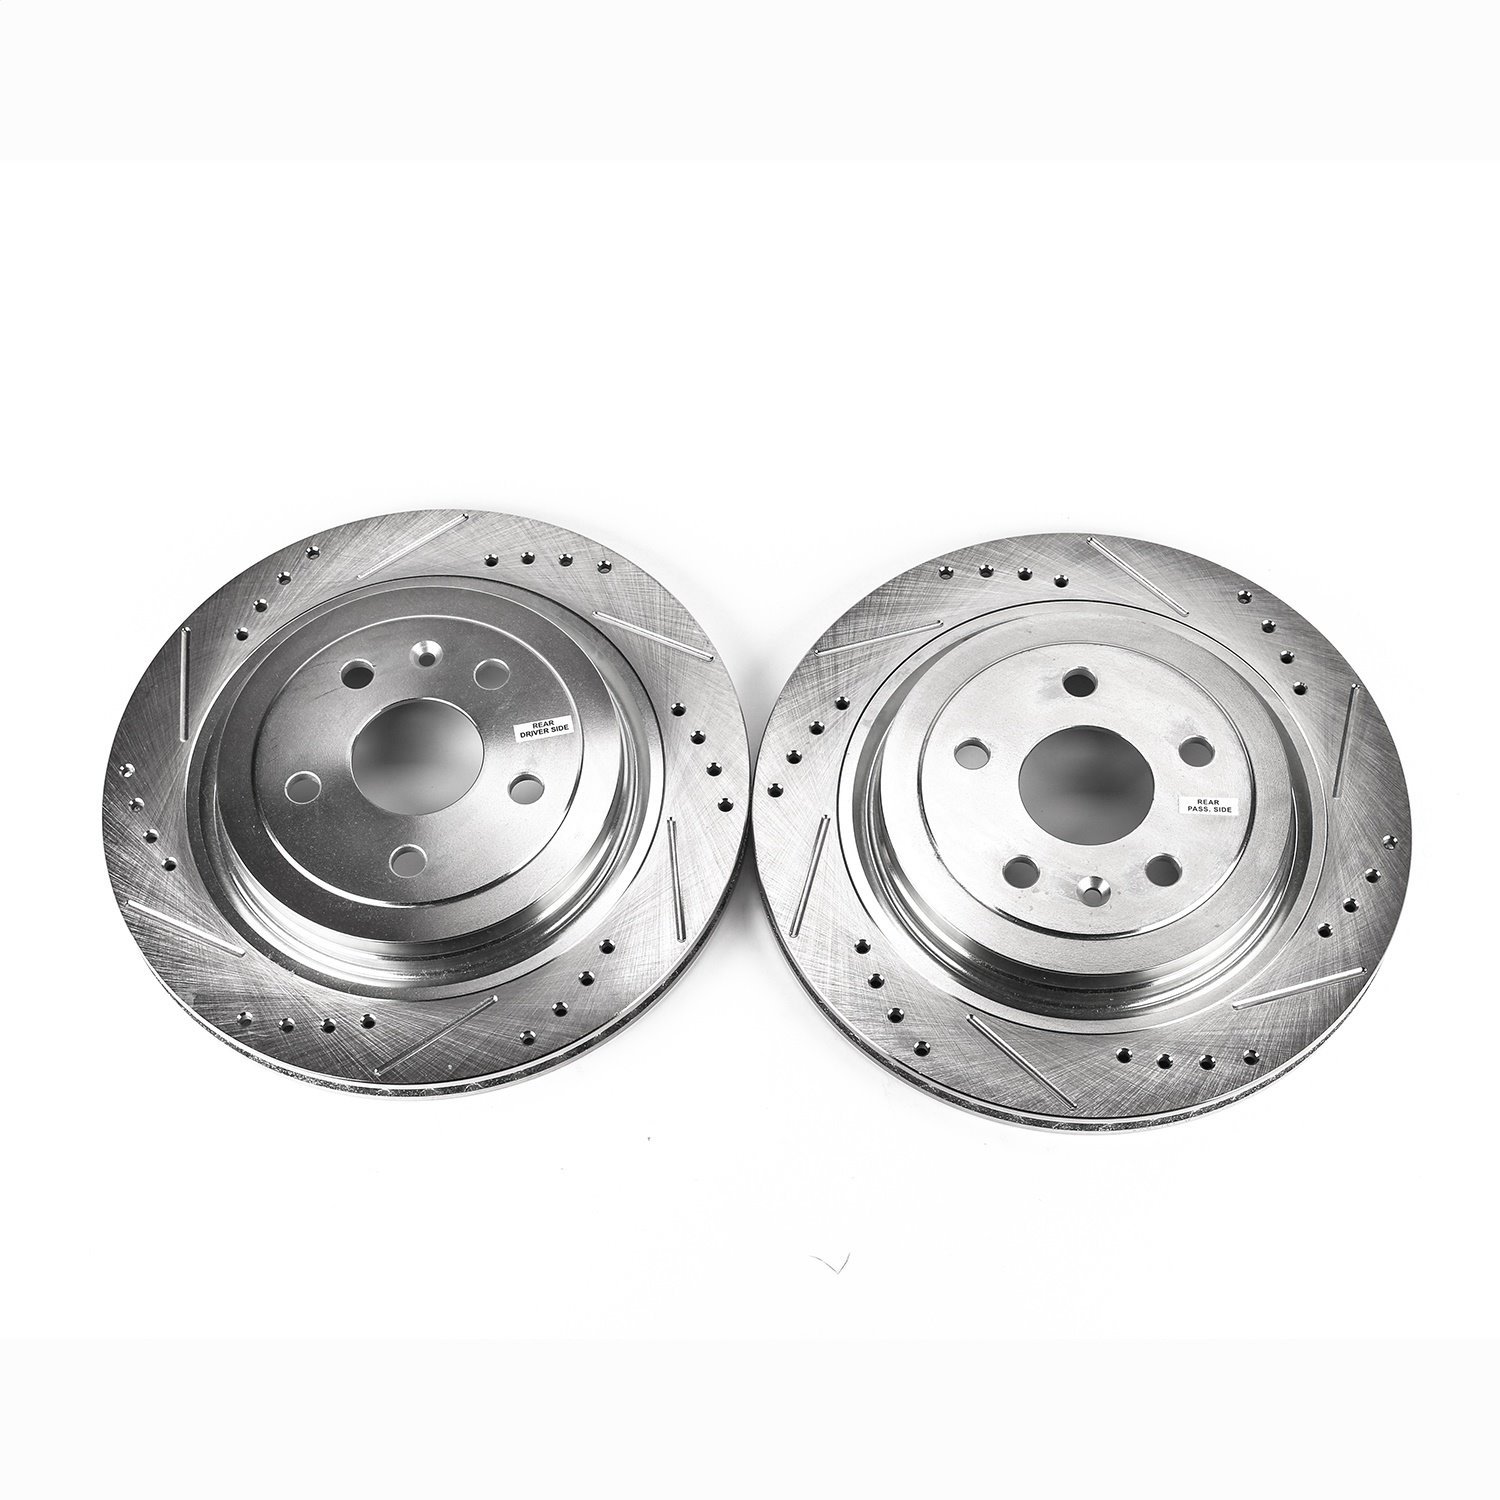 Power Stop drilled and slotted rotors give you the advantages of both drilled holes for cooling and